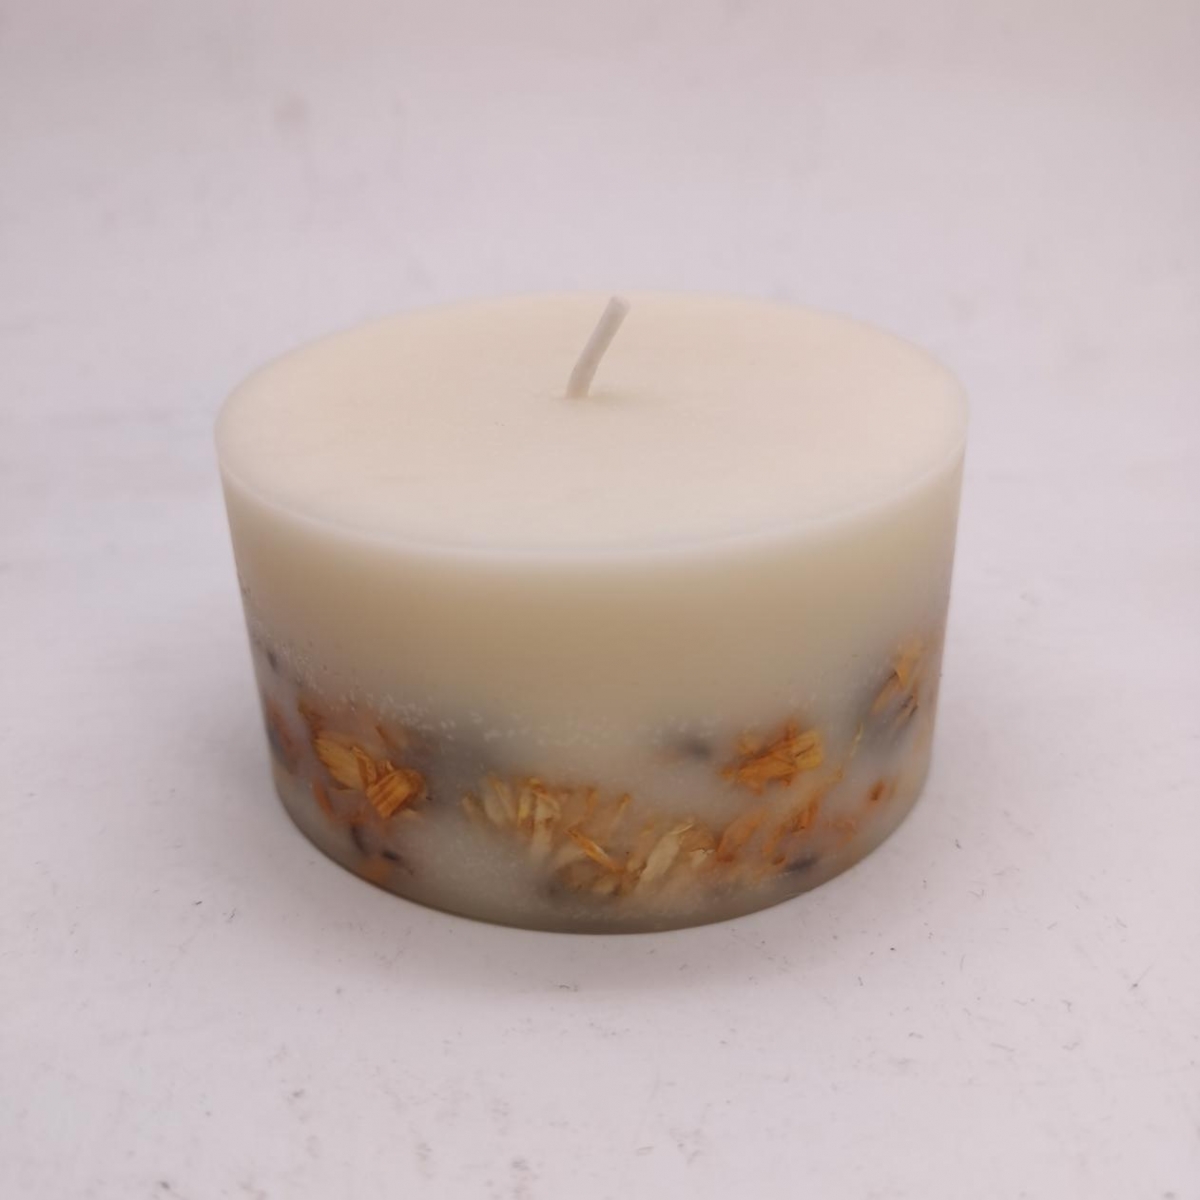 Dried Flower Pillar Candles：Natural Soy Wax, Wild Chrysanthemum ,Essential Oils, Scented Candles ,China Factory ,Good Price-HOWCANDLE-Candles,Scented Candles,Aromatherapy Candles,Soy Candles,Vegan Candles,Jar Candles,Pillar Candles,Candle Gift Sets,Essential Oils,Reed Diffuser,Candle Holder,